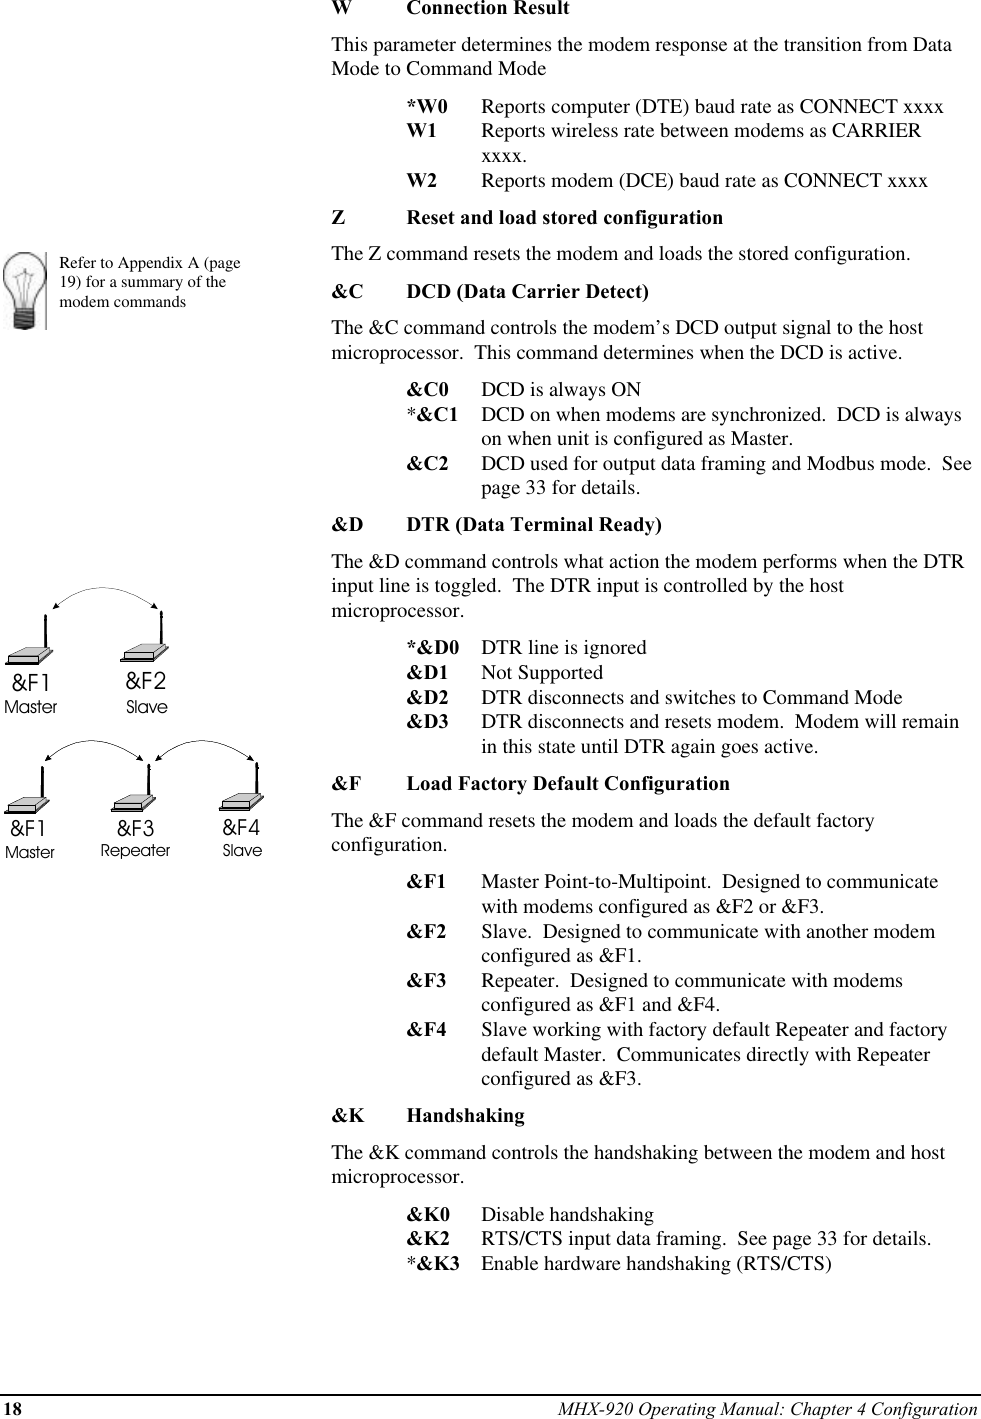 18 MHX-920 Operating Manual: Chapter 4 ConfigurationRefer to Appendix A (page19) for a summary of themodem commands&amp;F1 &amp;F2Master Slave&amp;F1 &amp;F4&amp;F3Master Repeater SlaveWConnection ResultThis parameter determines the modem response at the transition from DataMode to Command Mode*W0 Reports computer (DTE) baud rate as CONNECT xxxxW1 Reports wireless rate between modems as CARRIER xxxx.W2 Reports modem (DCE) baud rate as CONNECT xxxxZReset and load stored configurationThe Z command resets the modem and loads the stored configuration.&amp;C DCD (Data Carrier Detect)The &amp;C command controls the modem’s DCD output signal to the hostmicroprocessor.  This command determines when the DCD is active.&amp;C0 DCD is always ON*&amp;C1 DCD on when modems are synchronized.  DCD is alwayson when unit is configured as Master.&amp;C2 DCD used for output data framing and Modbus mode.  Seepage 33 for details.&amp;D DTR (Data Terminal Ready)The &amp;D command controls what action the modem performs when the DTRinput line is toggled.  The DTR input is controlled by the hostmicroprocessor.*&amp;D0 DTR line is ignored&amp;D1 Not Supported&amp;D2 DTR disconnects and switches to Command Mode&amp;D3 DTR disconnects and resets modem.  Modem will remainin this state until DTR again goes active.&amp;F Load Factory Default ConfigurationThe &amp;F command resets the modem and loads the default factoryconfiguration.&amp;F1 Master Point-to-Multipoint.  Designed to communicatewith modems configured as &amp;F2 or &amp;F3.&amp;F2 Slave.  Designed to communicate with another modemconfigured as &amp;F1.&amp;F3 Repeater.  Designed to communicate with modemsconfigured as &amp;F1 and &amp;F4.&amp;F4 Slave working with factory default Repeater and factorydefault Master.  Communicates directly with Repeaterconfigured as &amp;F3.&amp;K HandshakingThe &amp;K command controls the handshaking between the modem and hostmicroprocessor.&amp;K0 Disable handshaking&amp;K2 RTS/CTS input data framing.  See page 33 for details.*&amp;K3 Enable hardware handshaking (RTS/CTS)